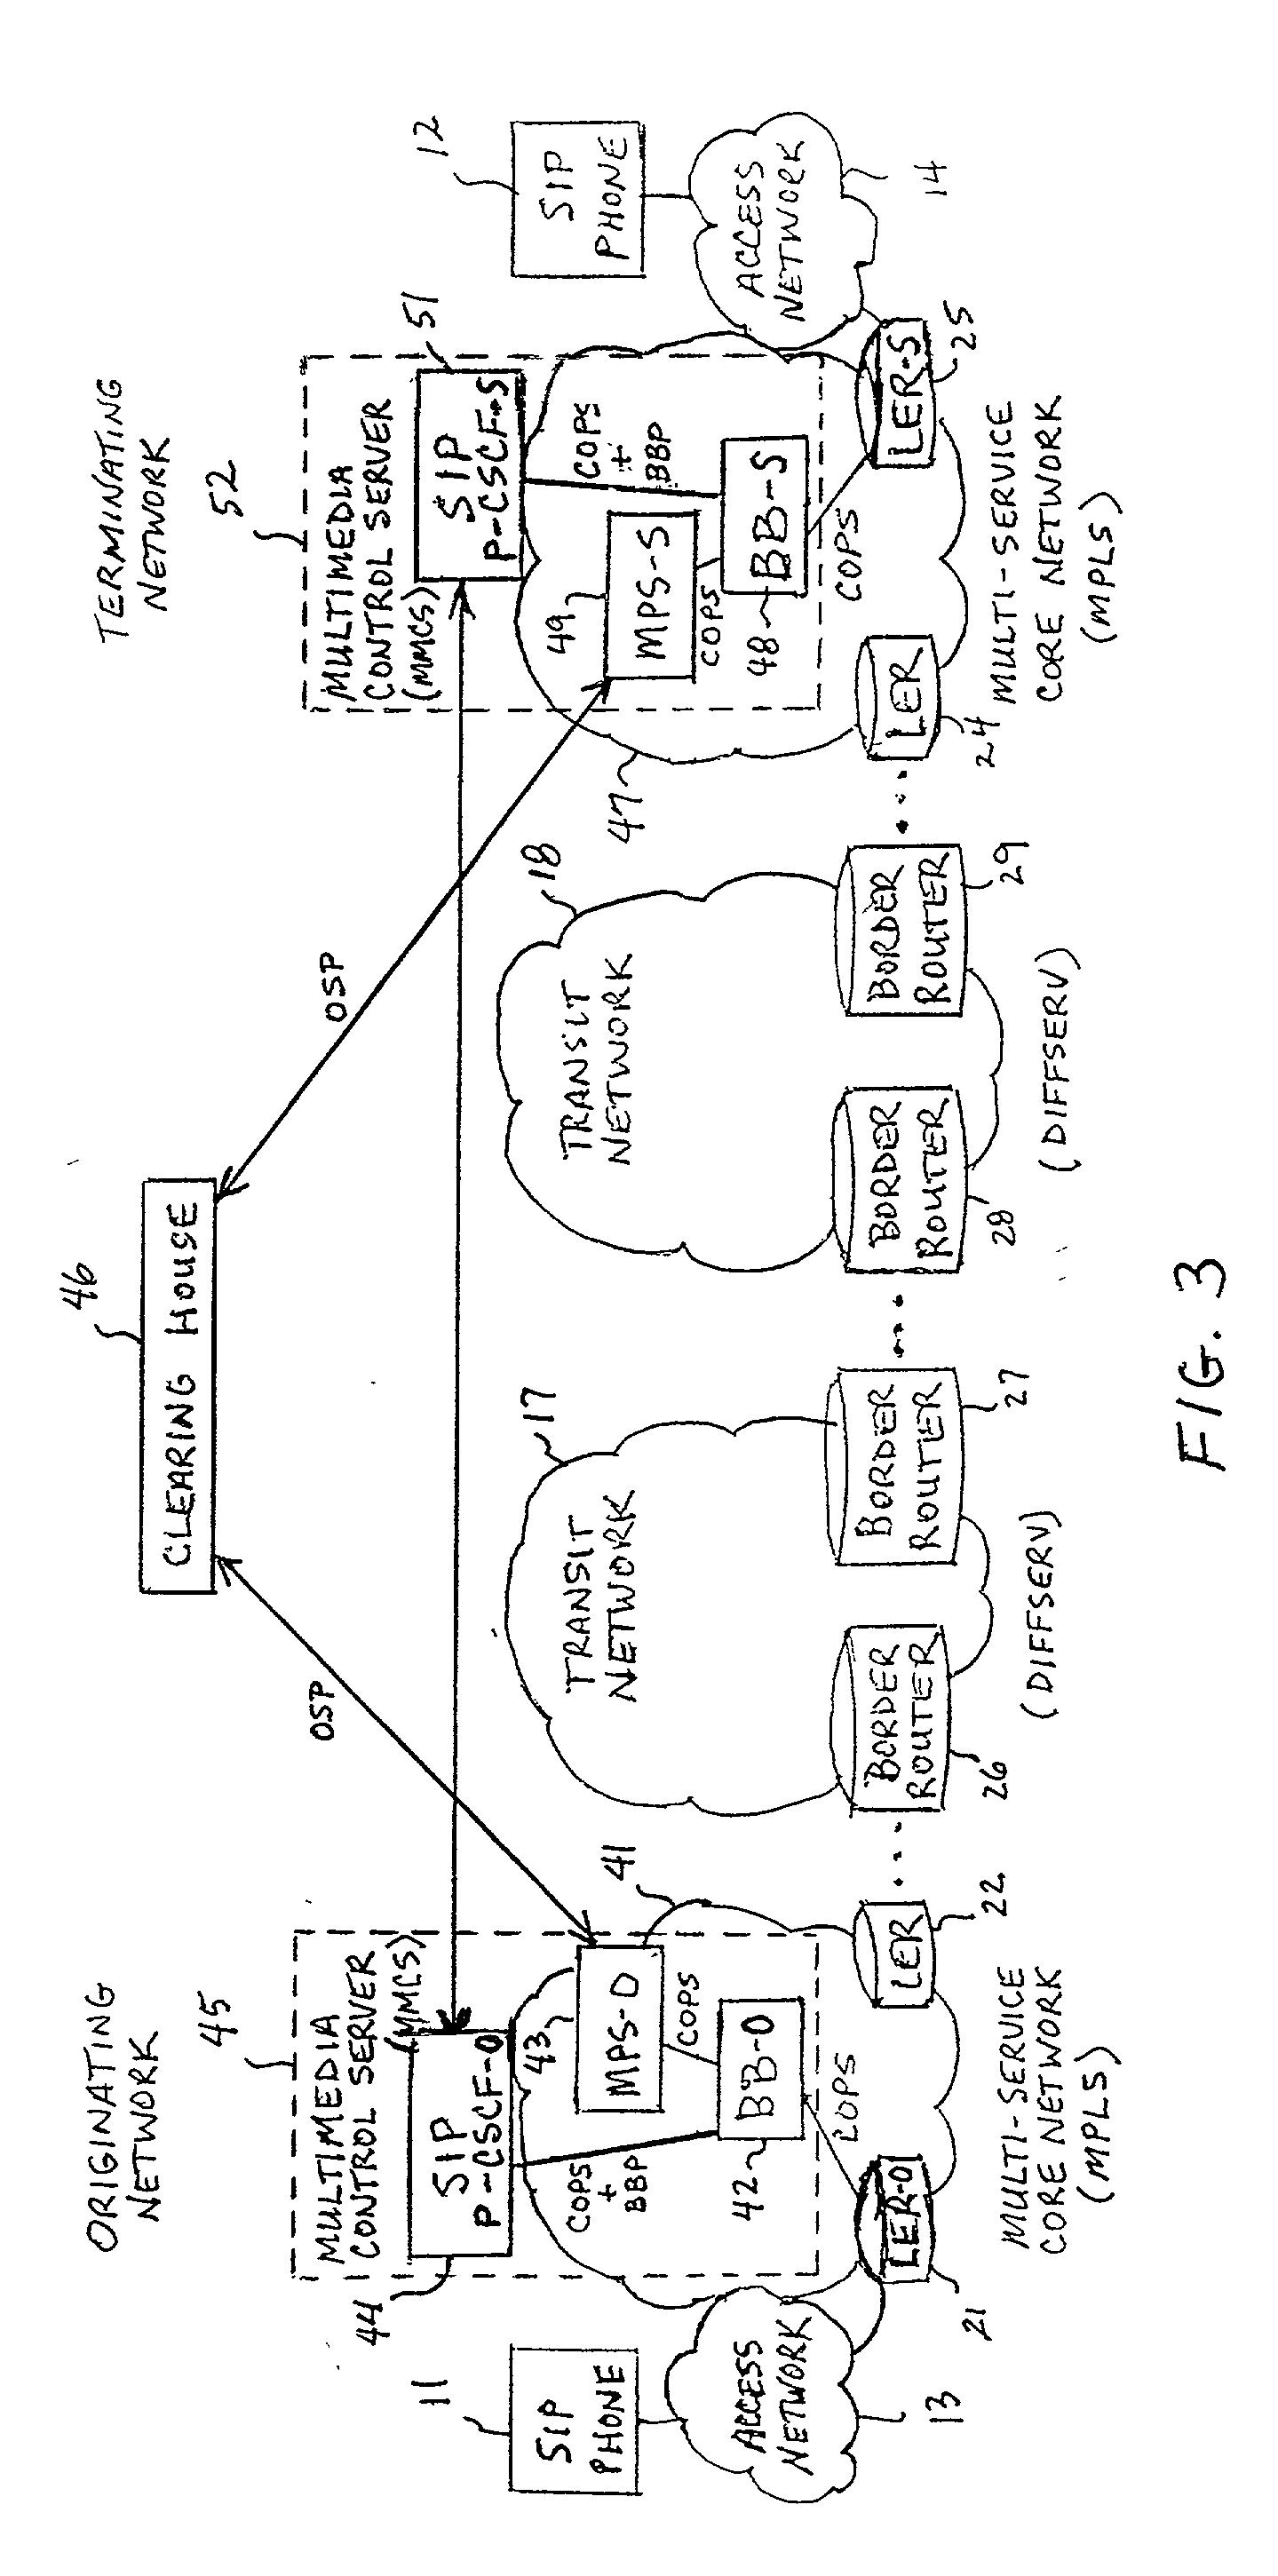 System and method for providing end-to-end quality of service (QoS) across multiple internet protocol (IP) networks